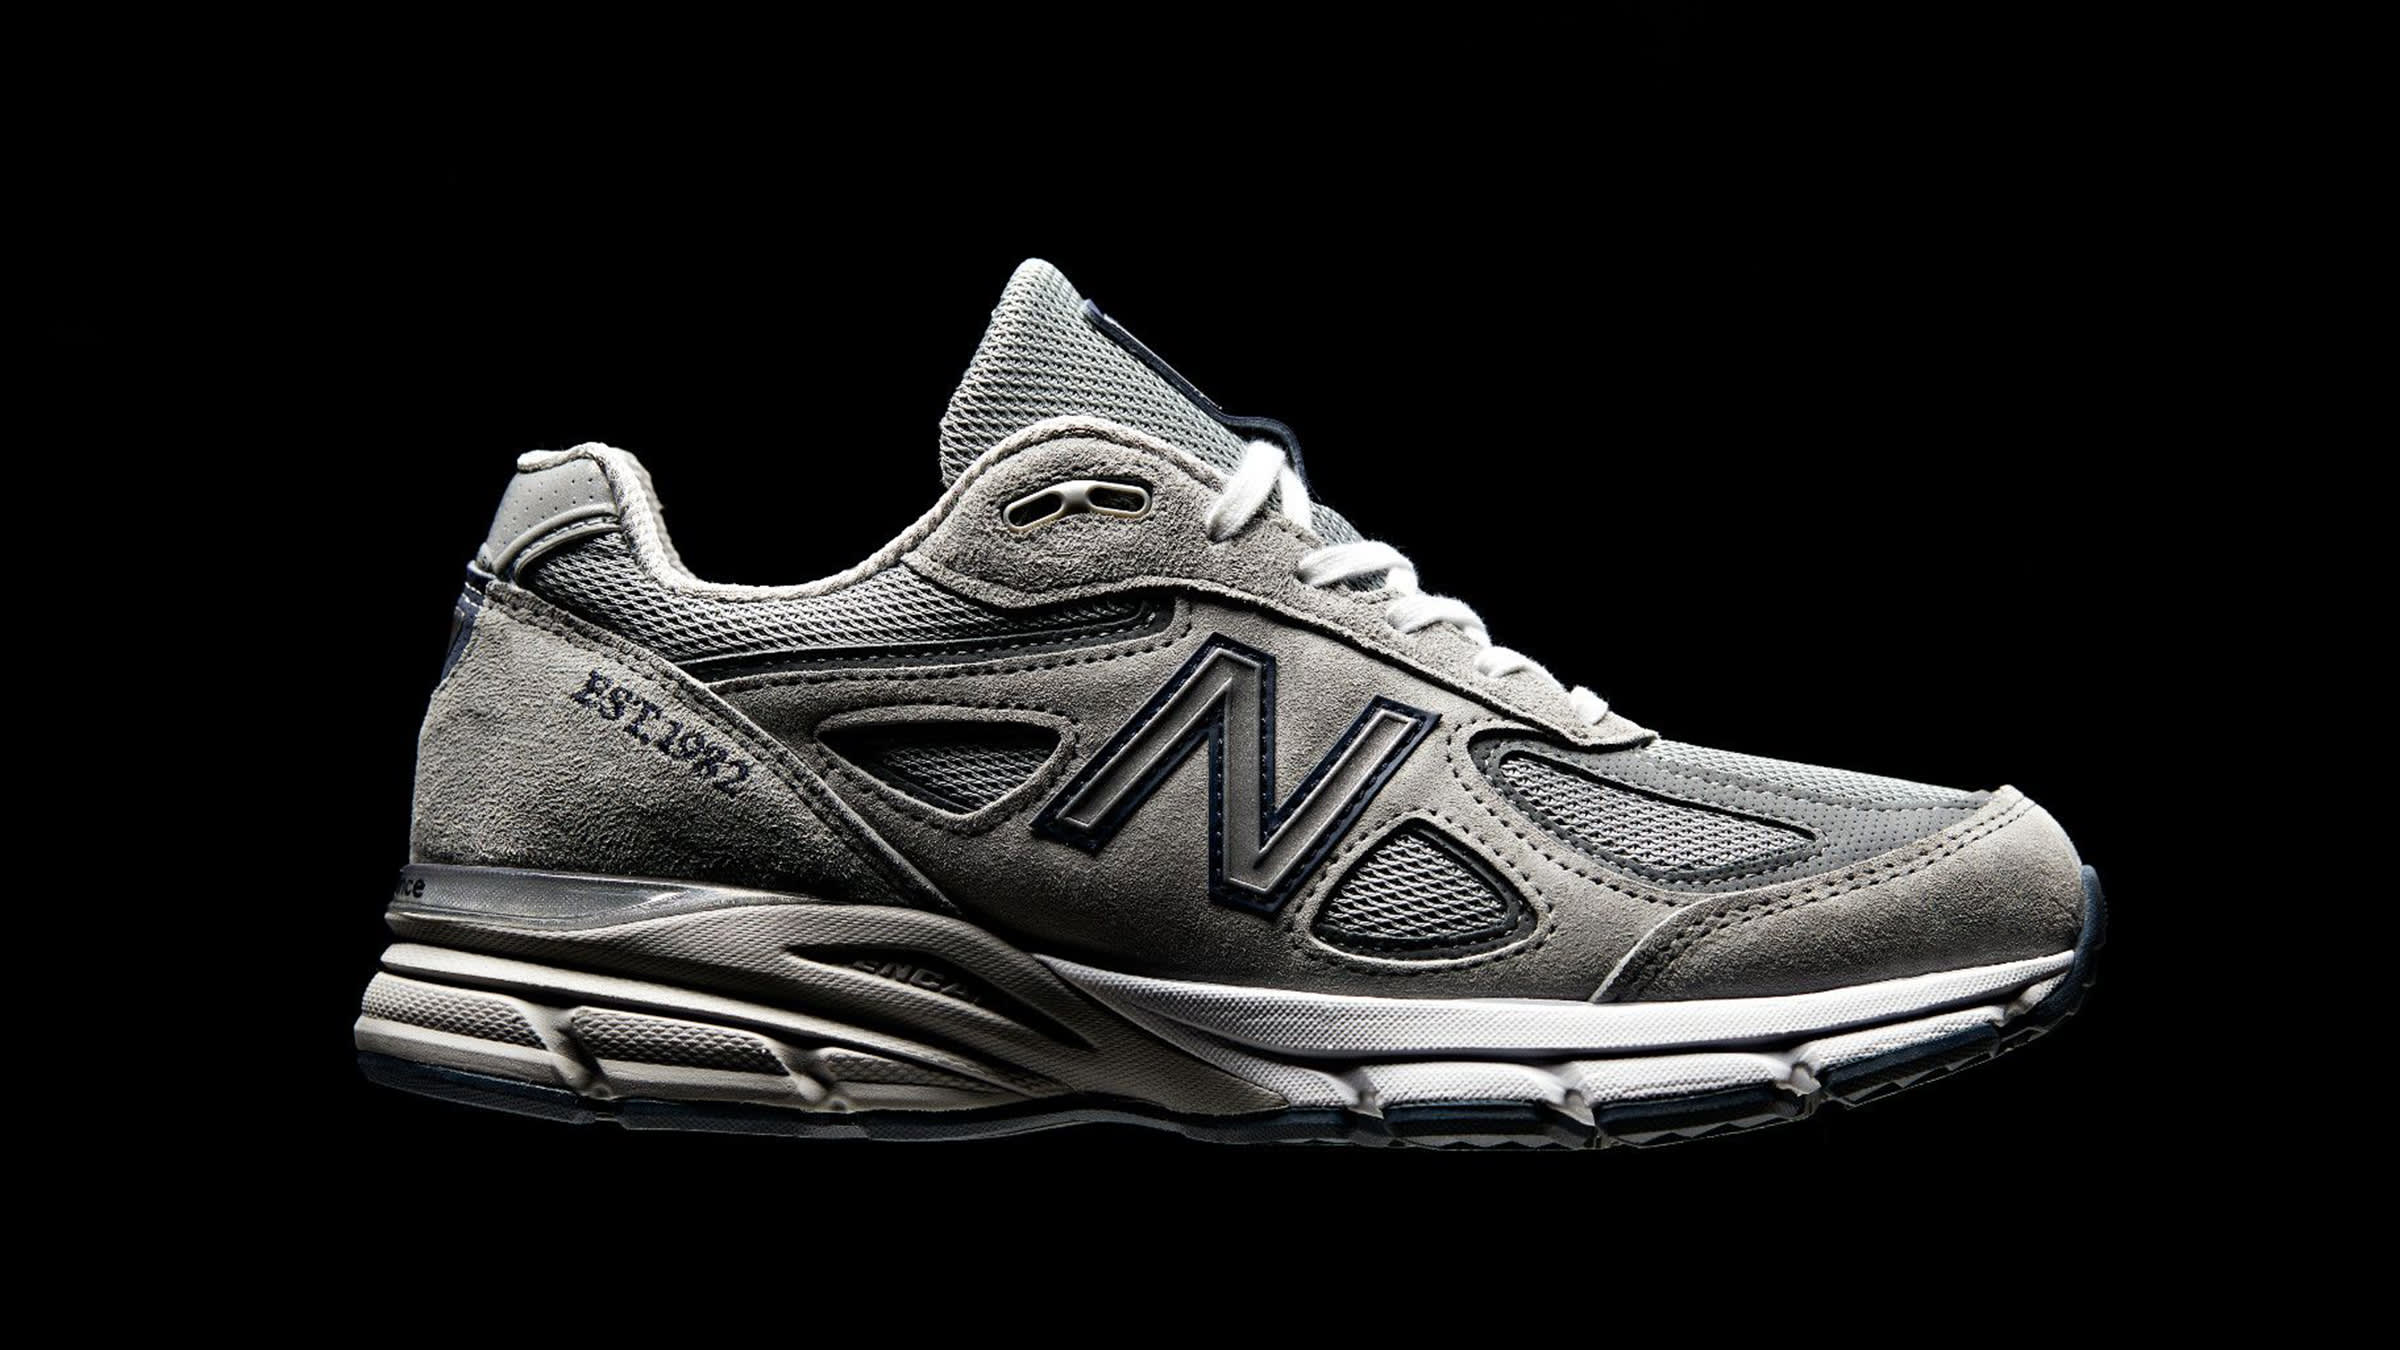 New Balance M990NB4 - Made in the USA (Grey) | END. Launches